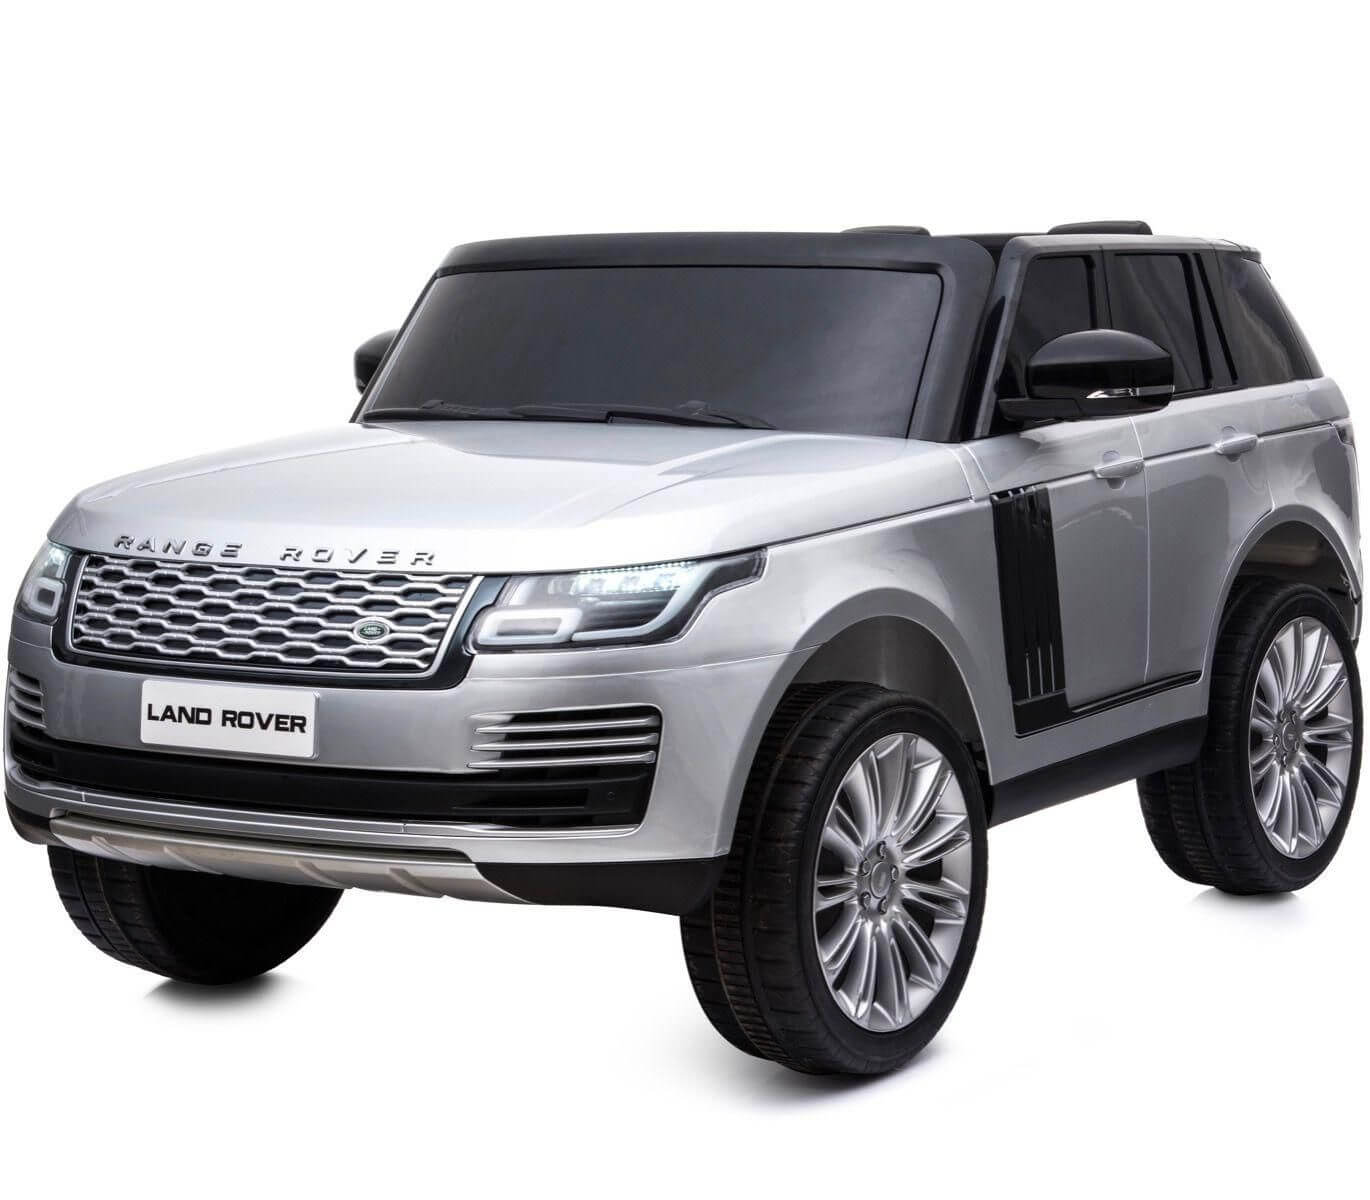 Silver Ride On Licensed Range Rover Vogue Two Seater Car for kids 24V